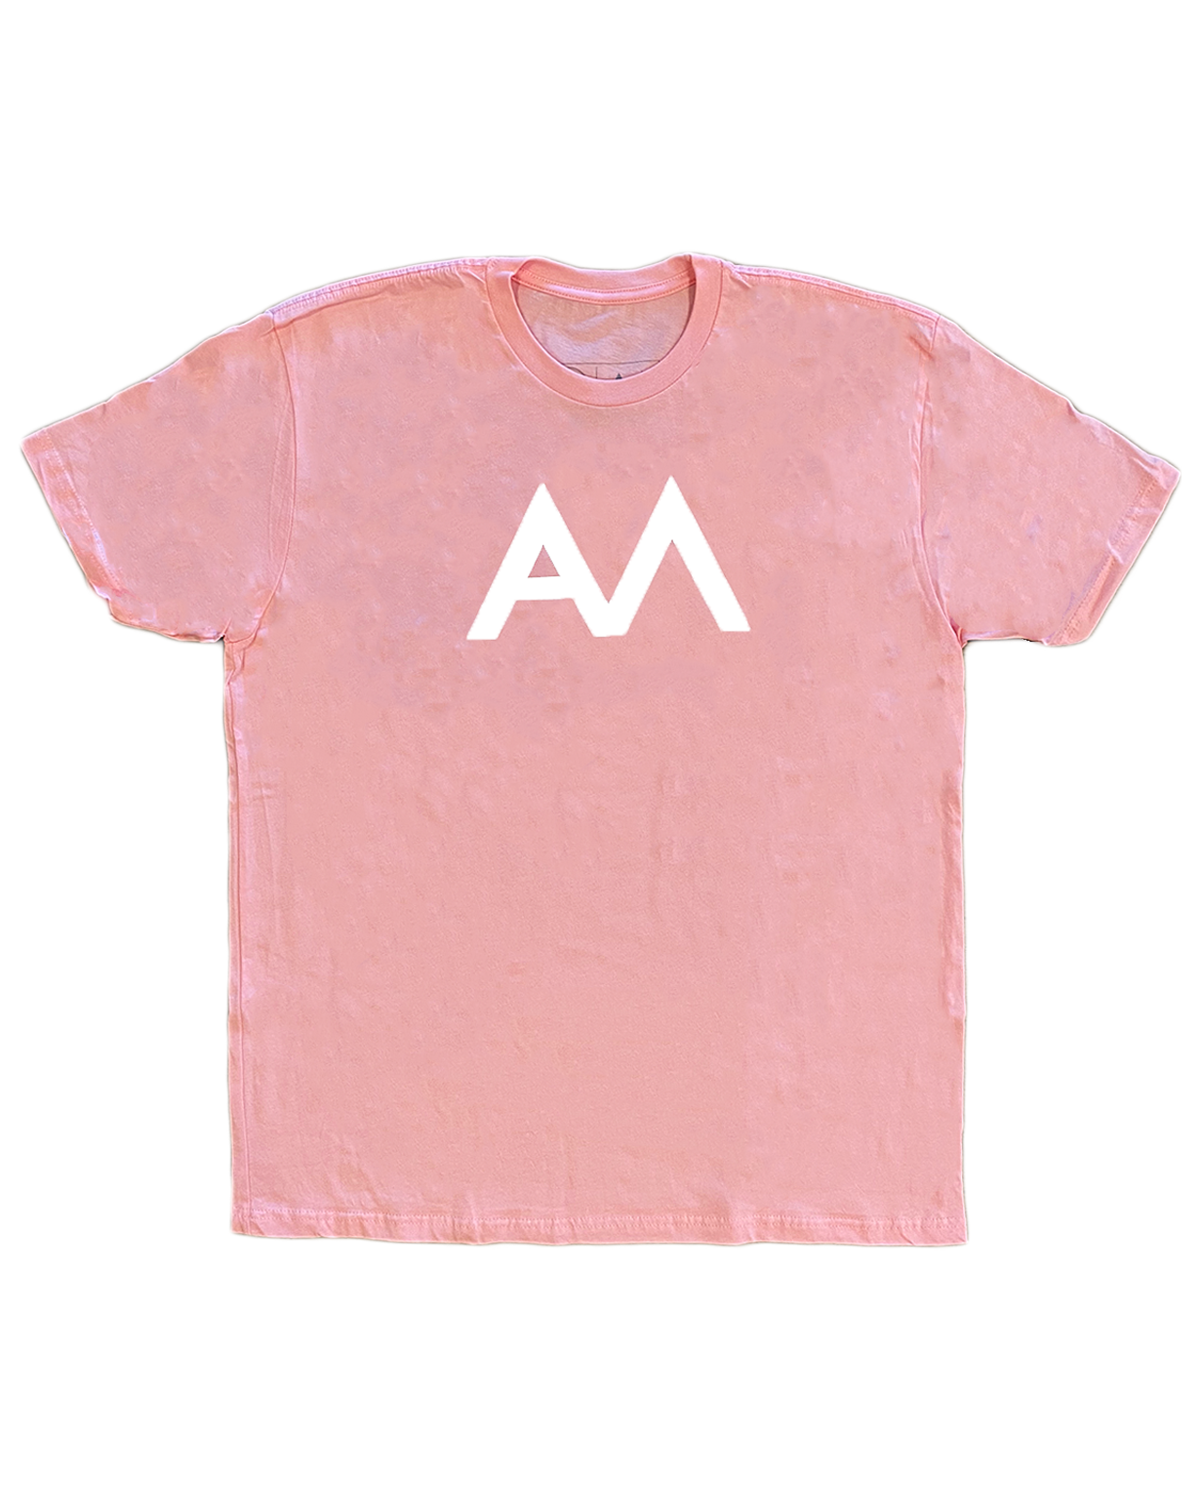 AM Tee in Pink